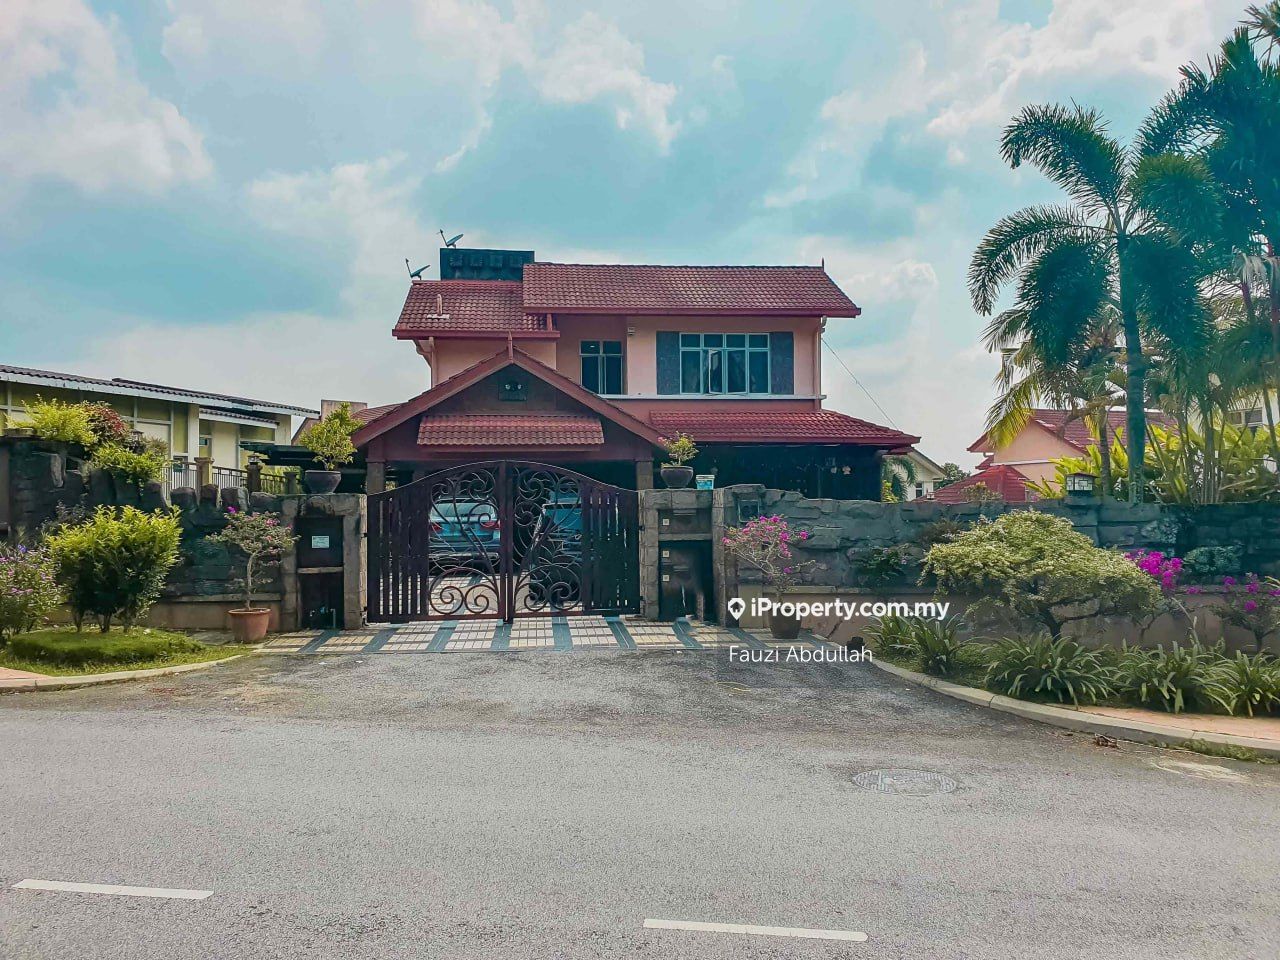 For Sale 2 Storey Bungalow Perdana Heights Shah Alam